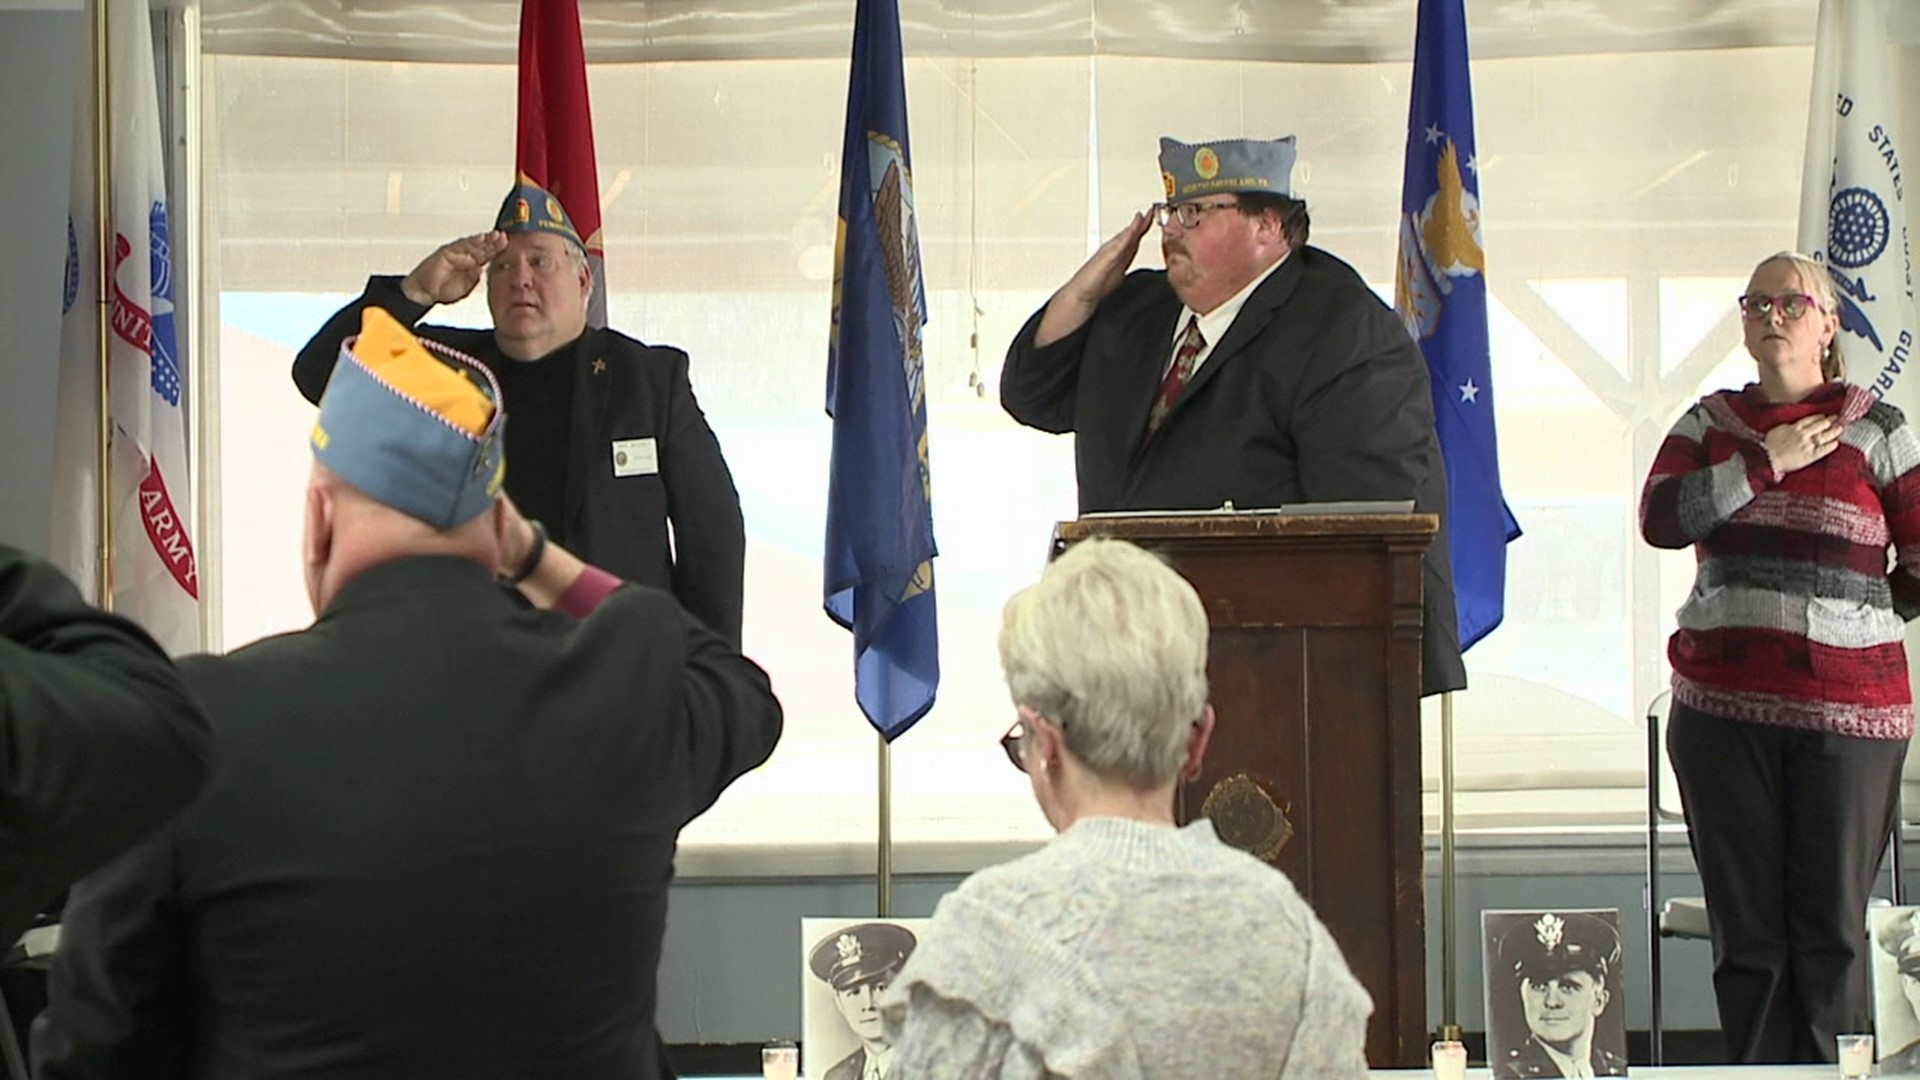 The Northumberland American Legion Post 44 hosted a memorial service in honor of 'Four Chaplains Day' Sunday.